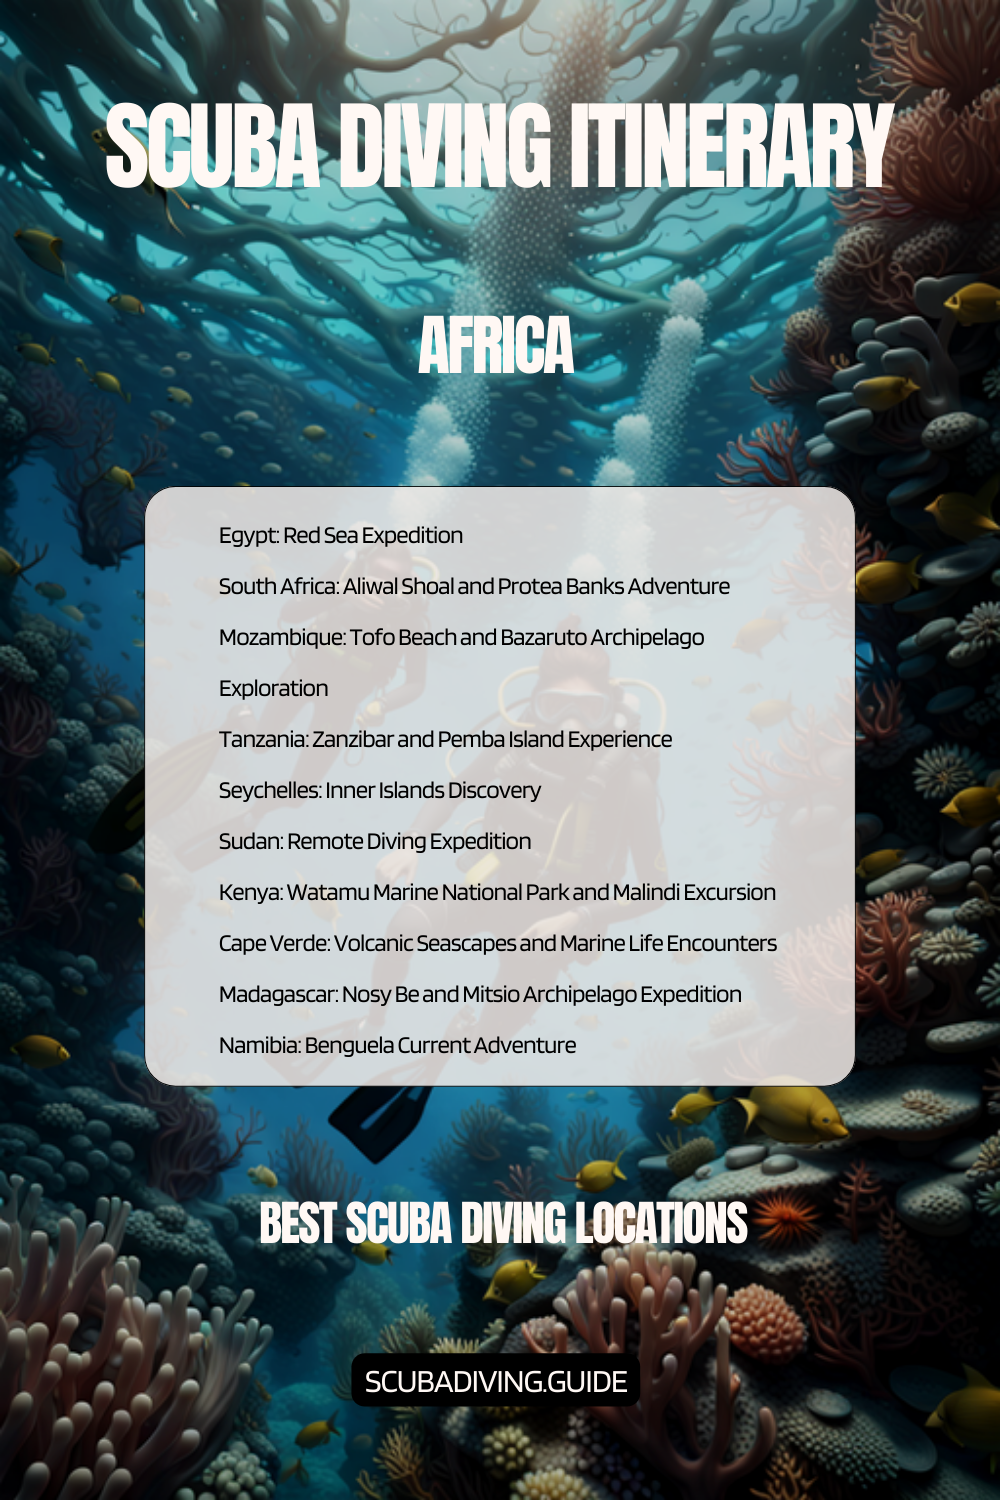 Africa Recommended Scuba Diving Itineraries